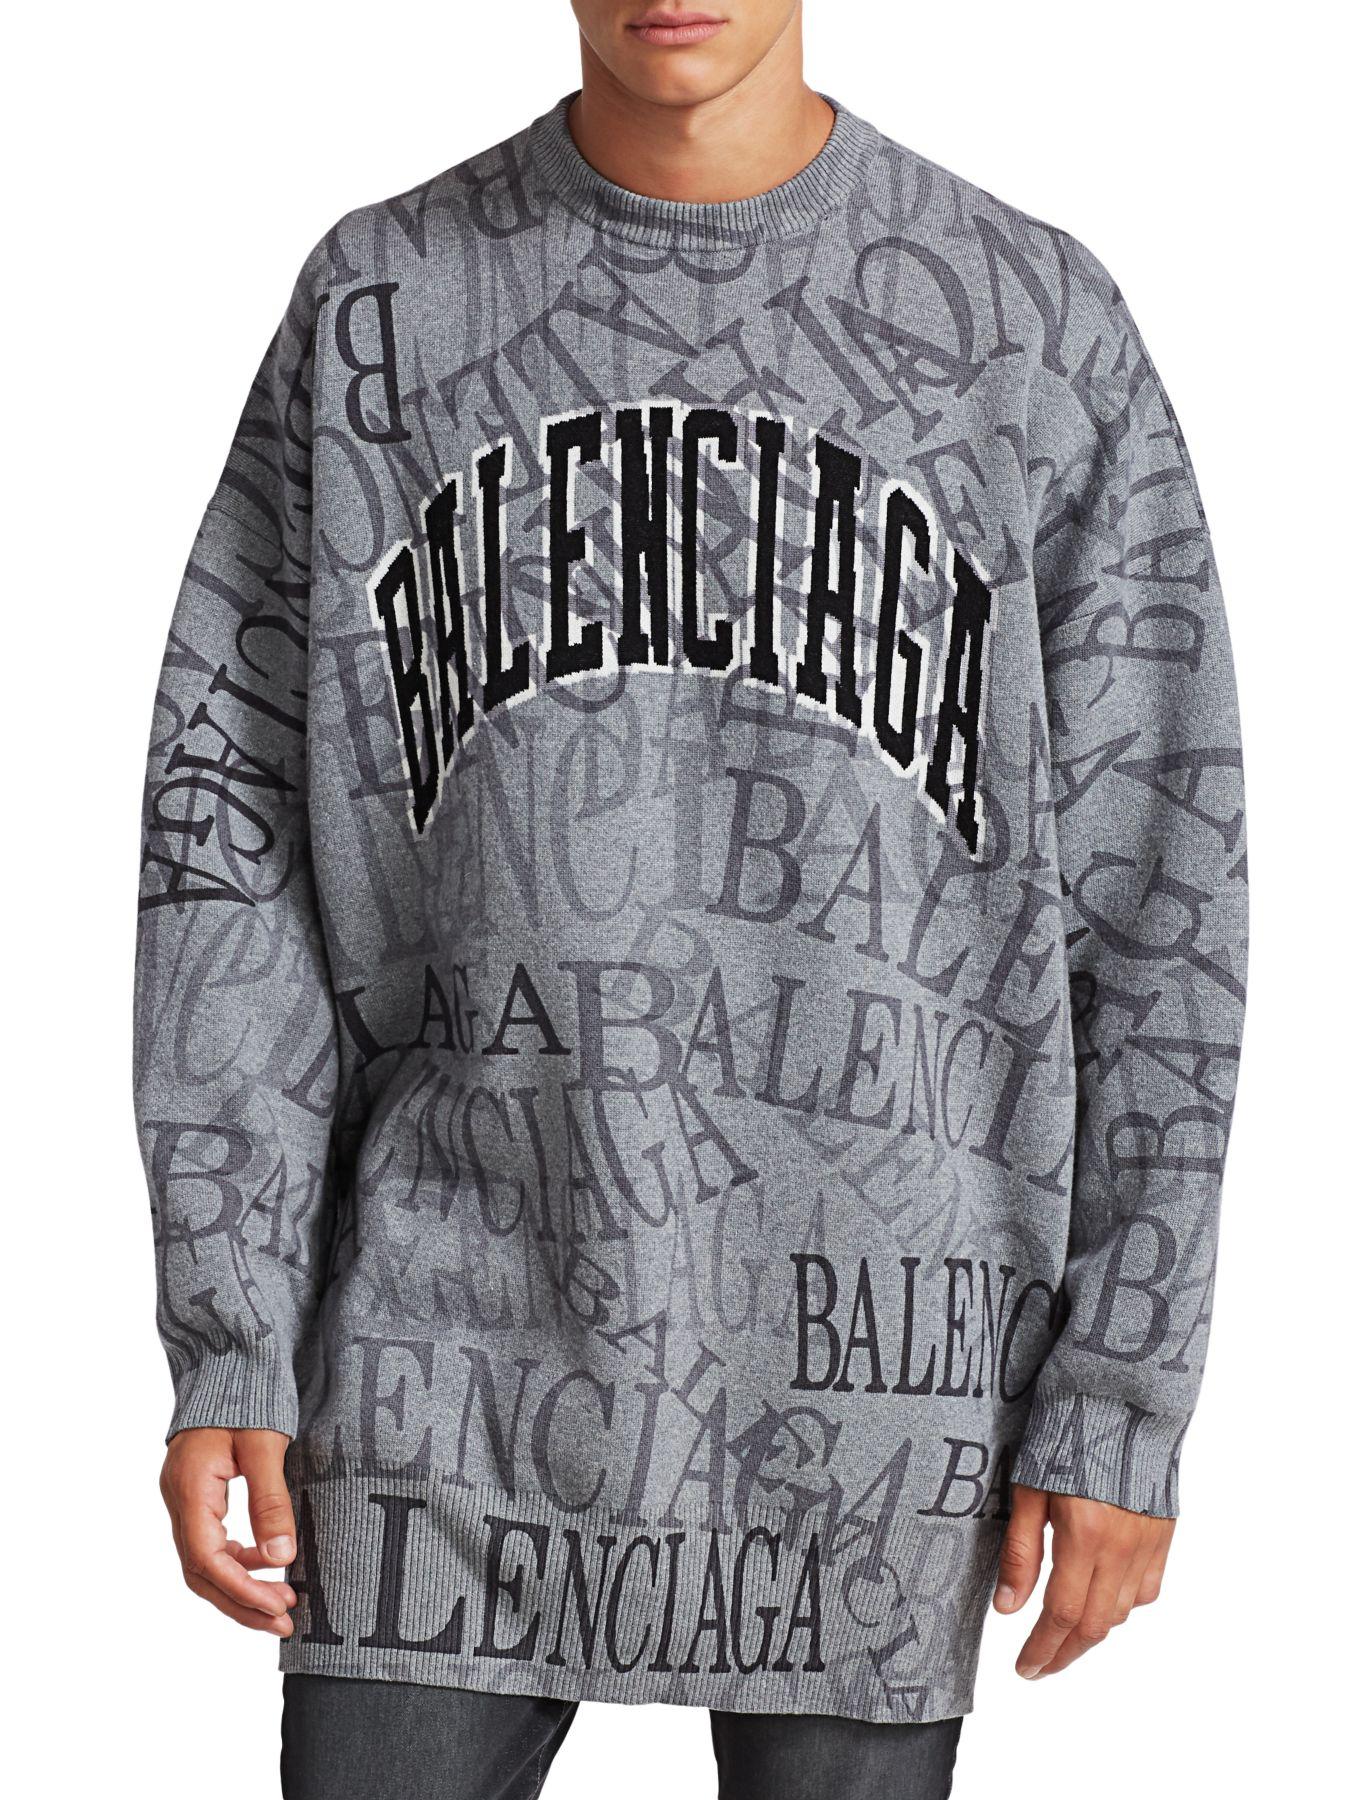 Balenciaga Synthetic Greyscale Sweater in Gray for Men - Lyst